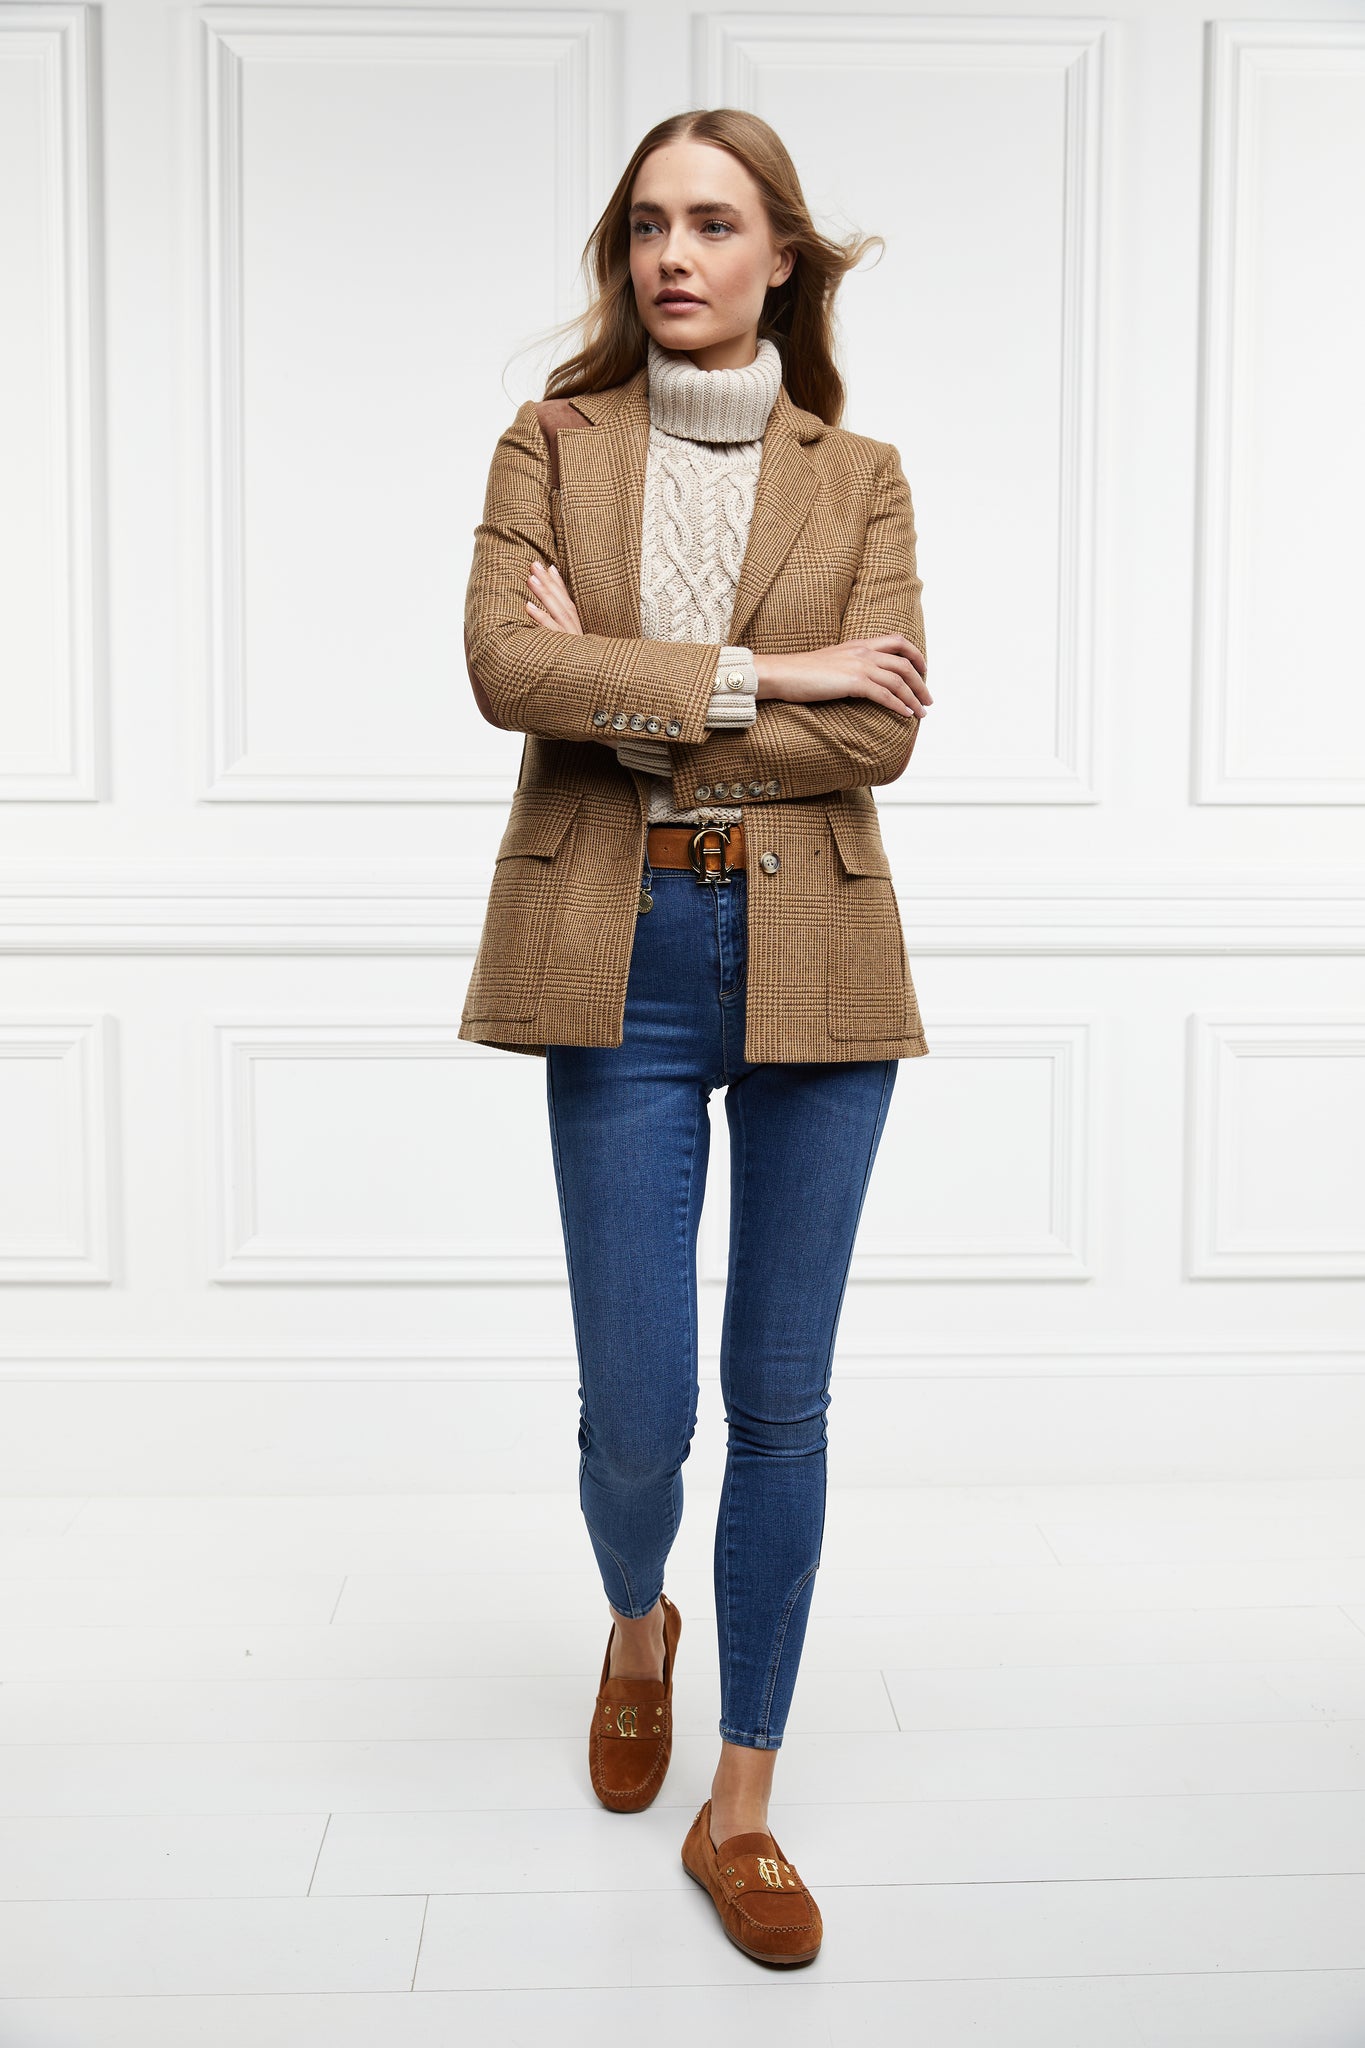 classic tan suede loafers with a leather sole and top stitching details and gold hardware paired with denim skinny jeans, cream cable knit jumper, tawny blazer and brown leather belt